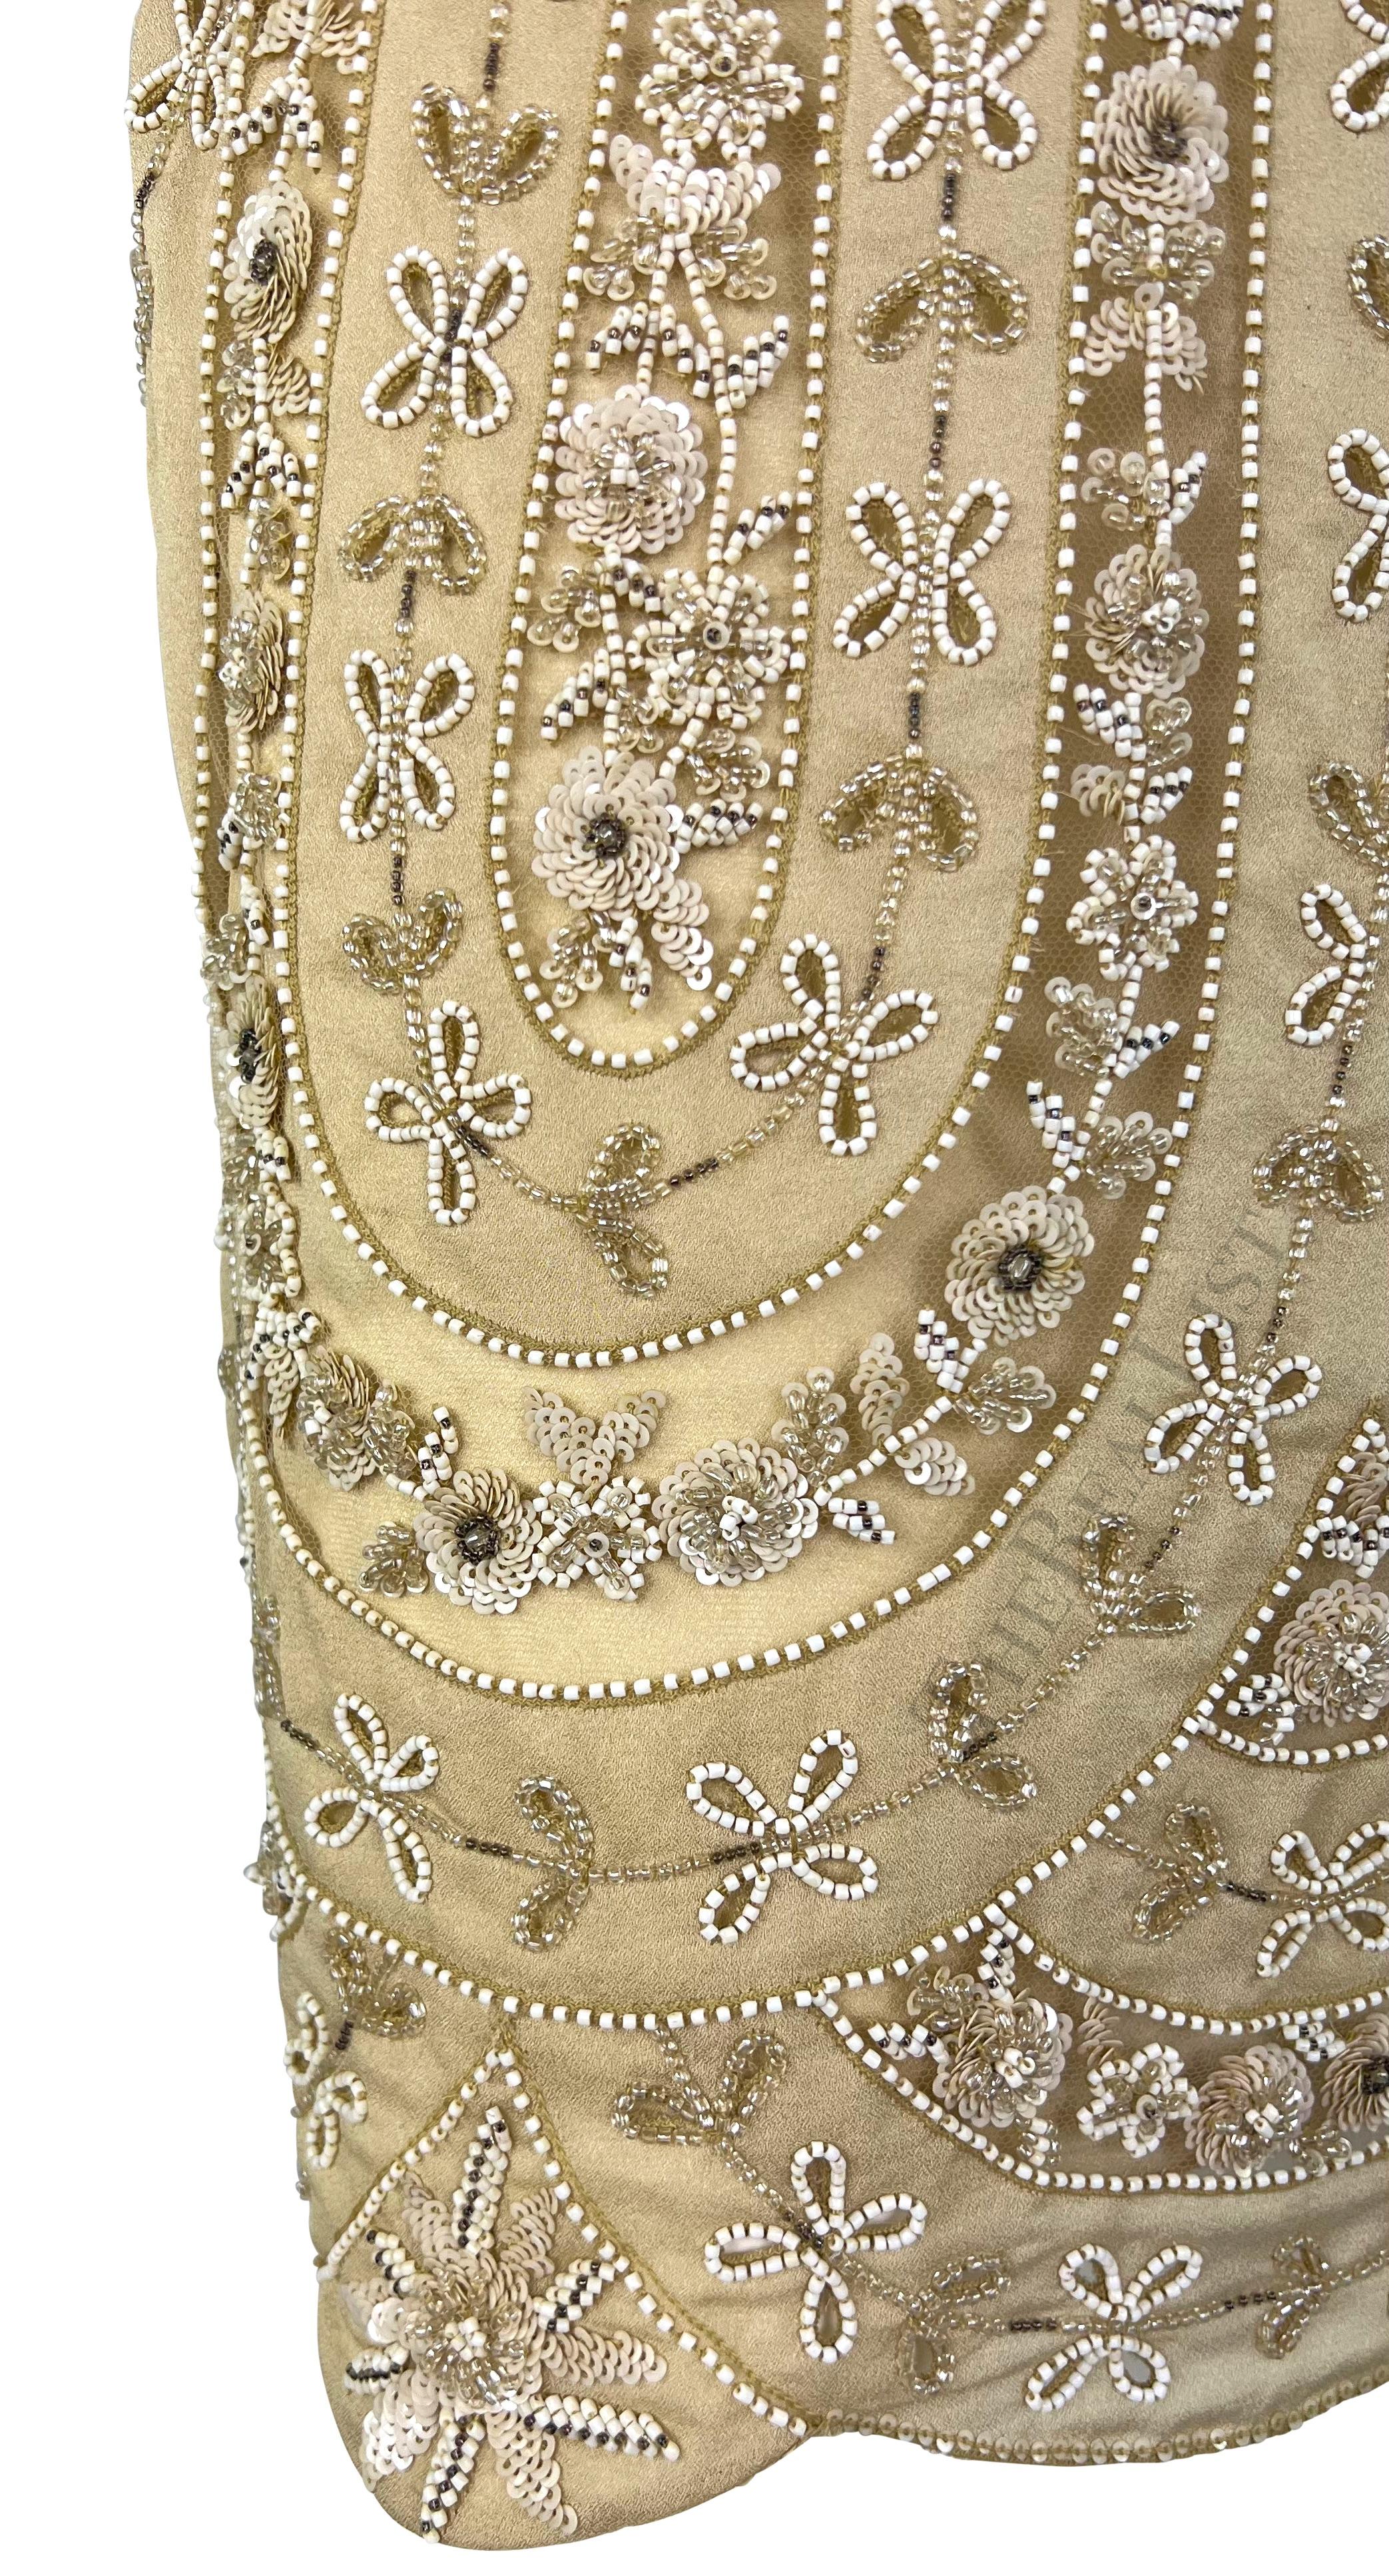 Presenting a fabulous beige beaded Valentino skirt. From the early 2000s, this intricate skirt is covered in a hand-beaded floral pattern. The skirt features a scalloped hem and is made complete with sheer mesh panels atop the underskirt. Truly a